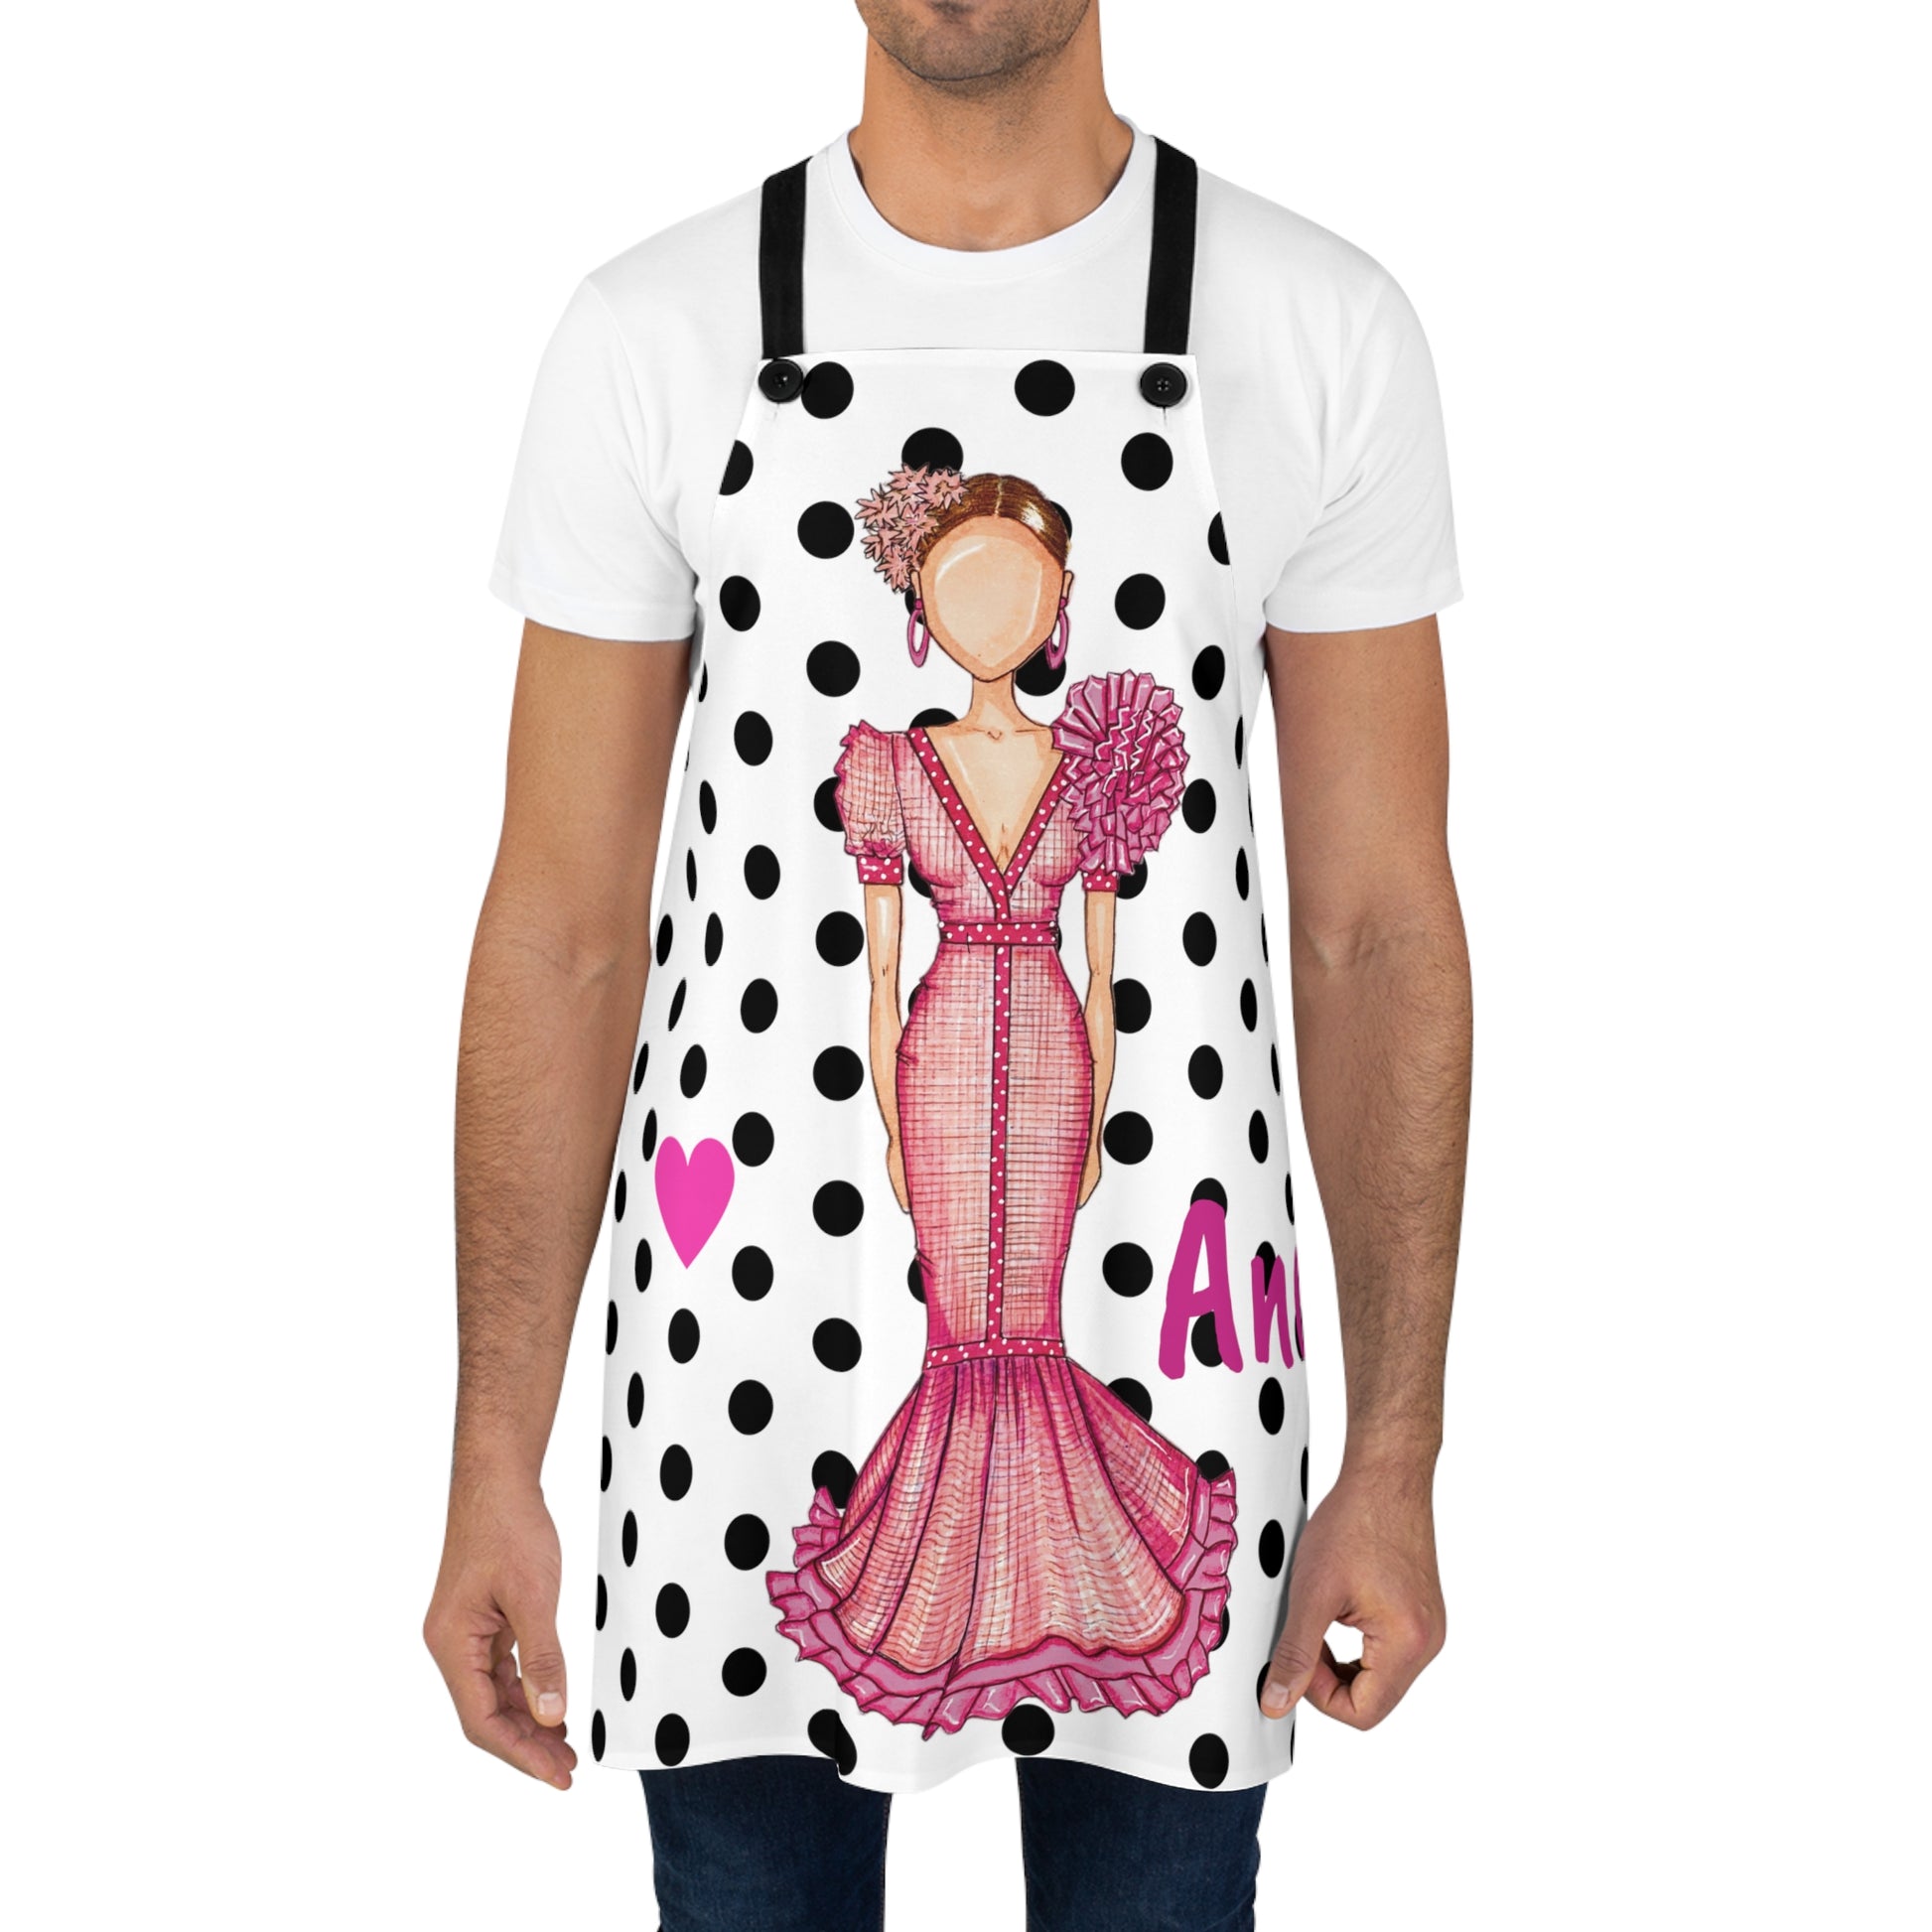 a man wearing an apron with a polka dot dress on it